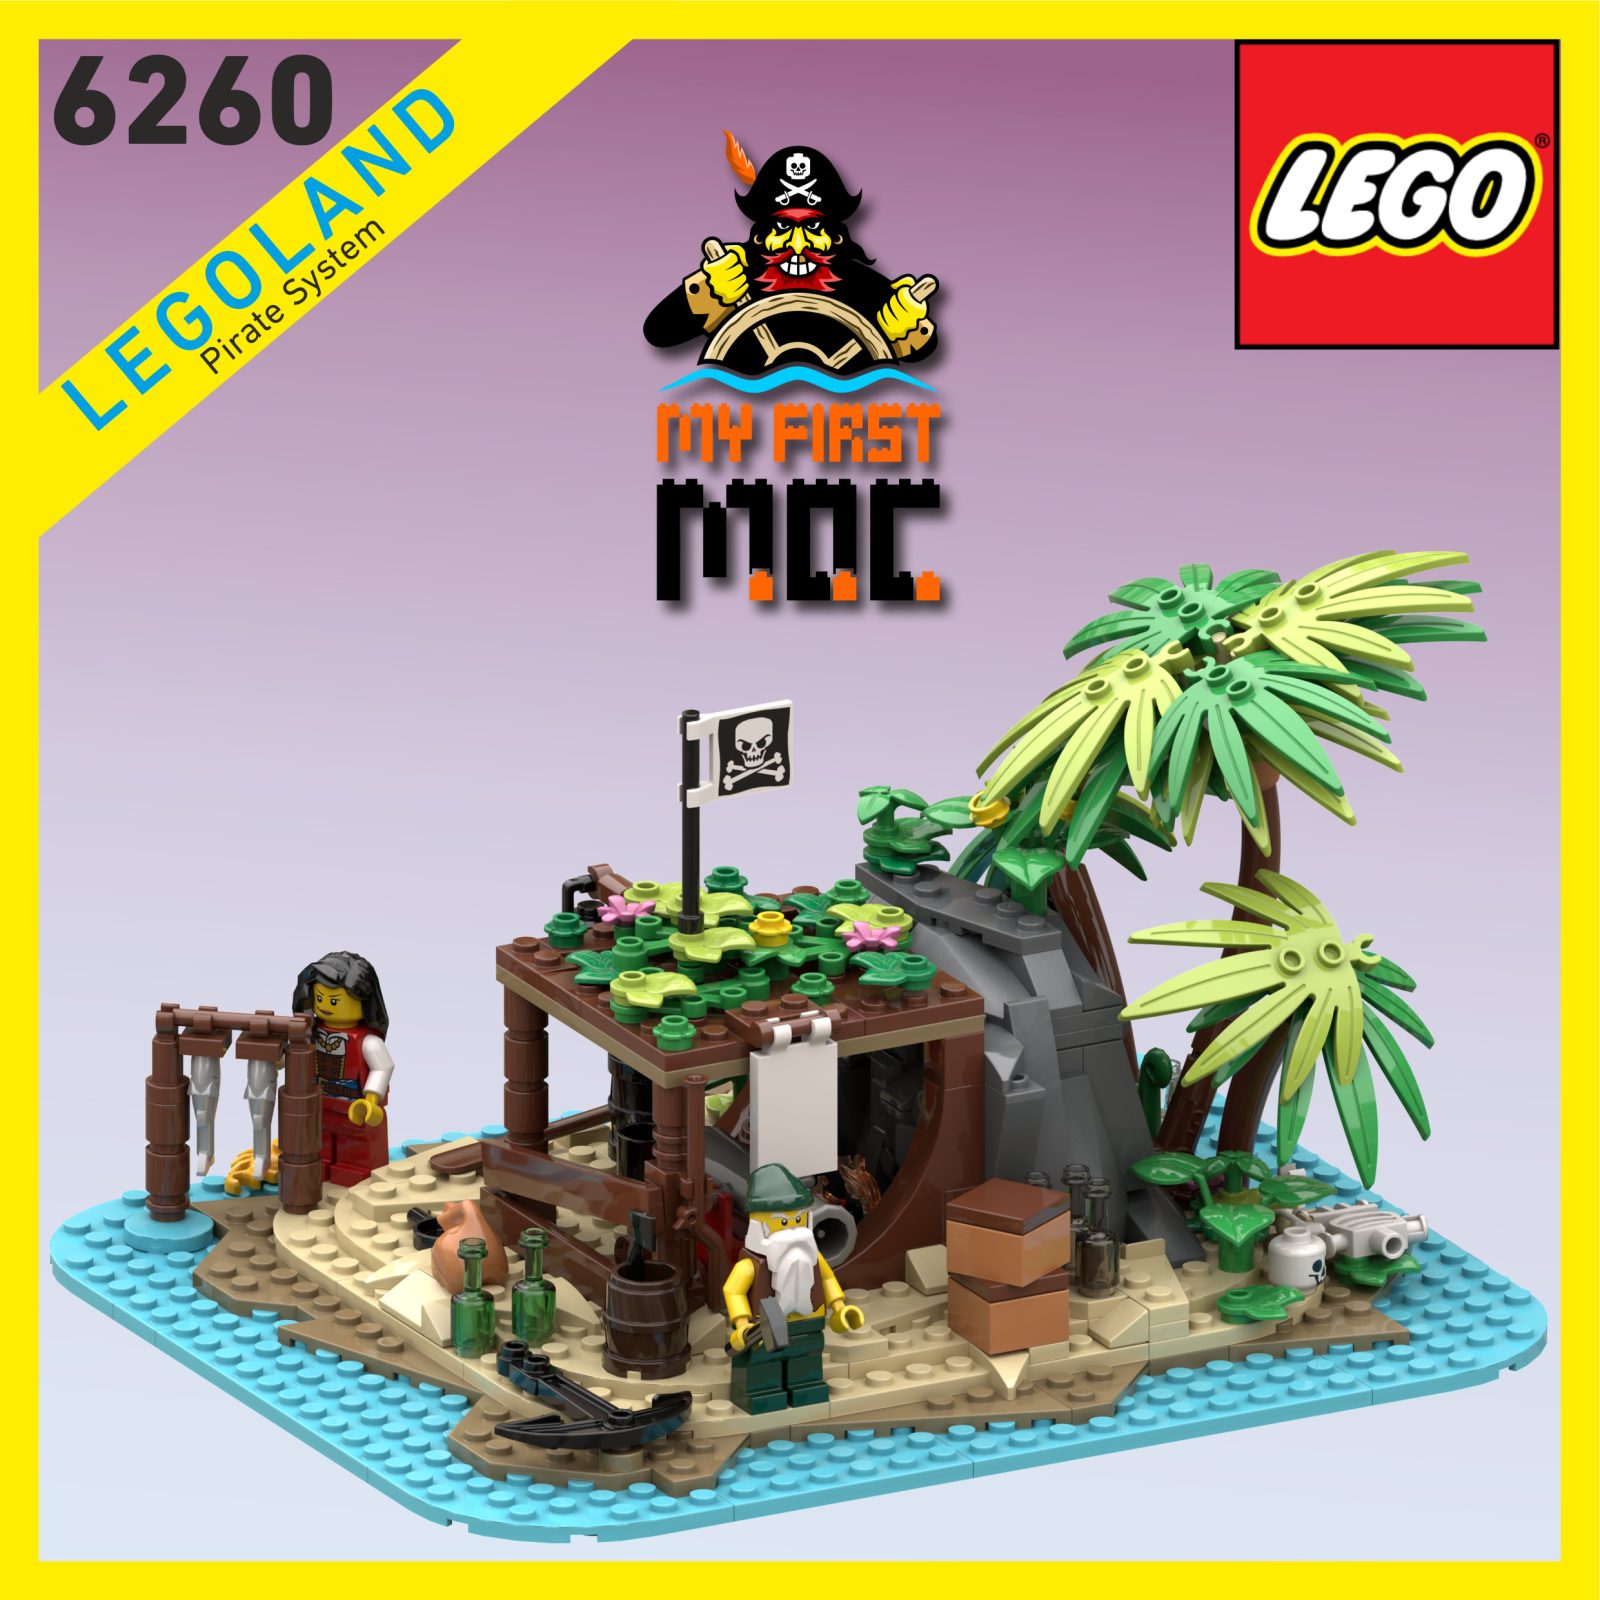 Featured Image for "6260 Shipwrecked Island Remake"